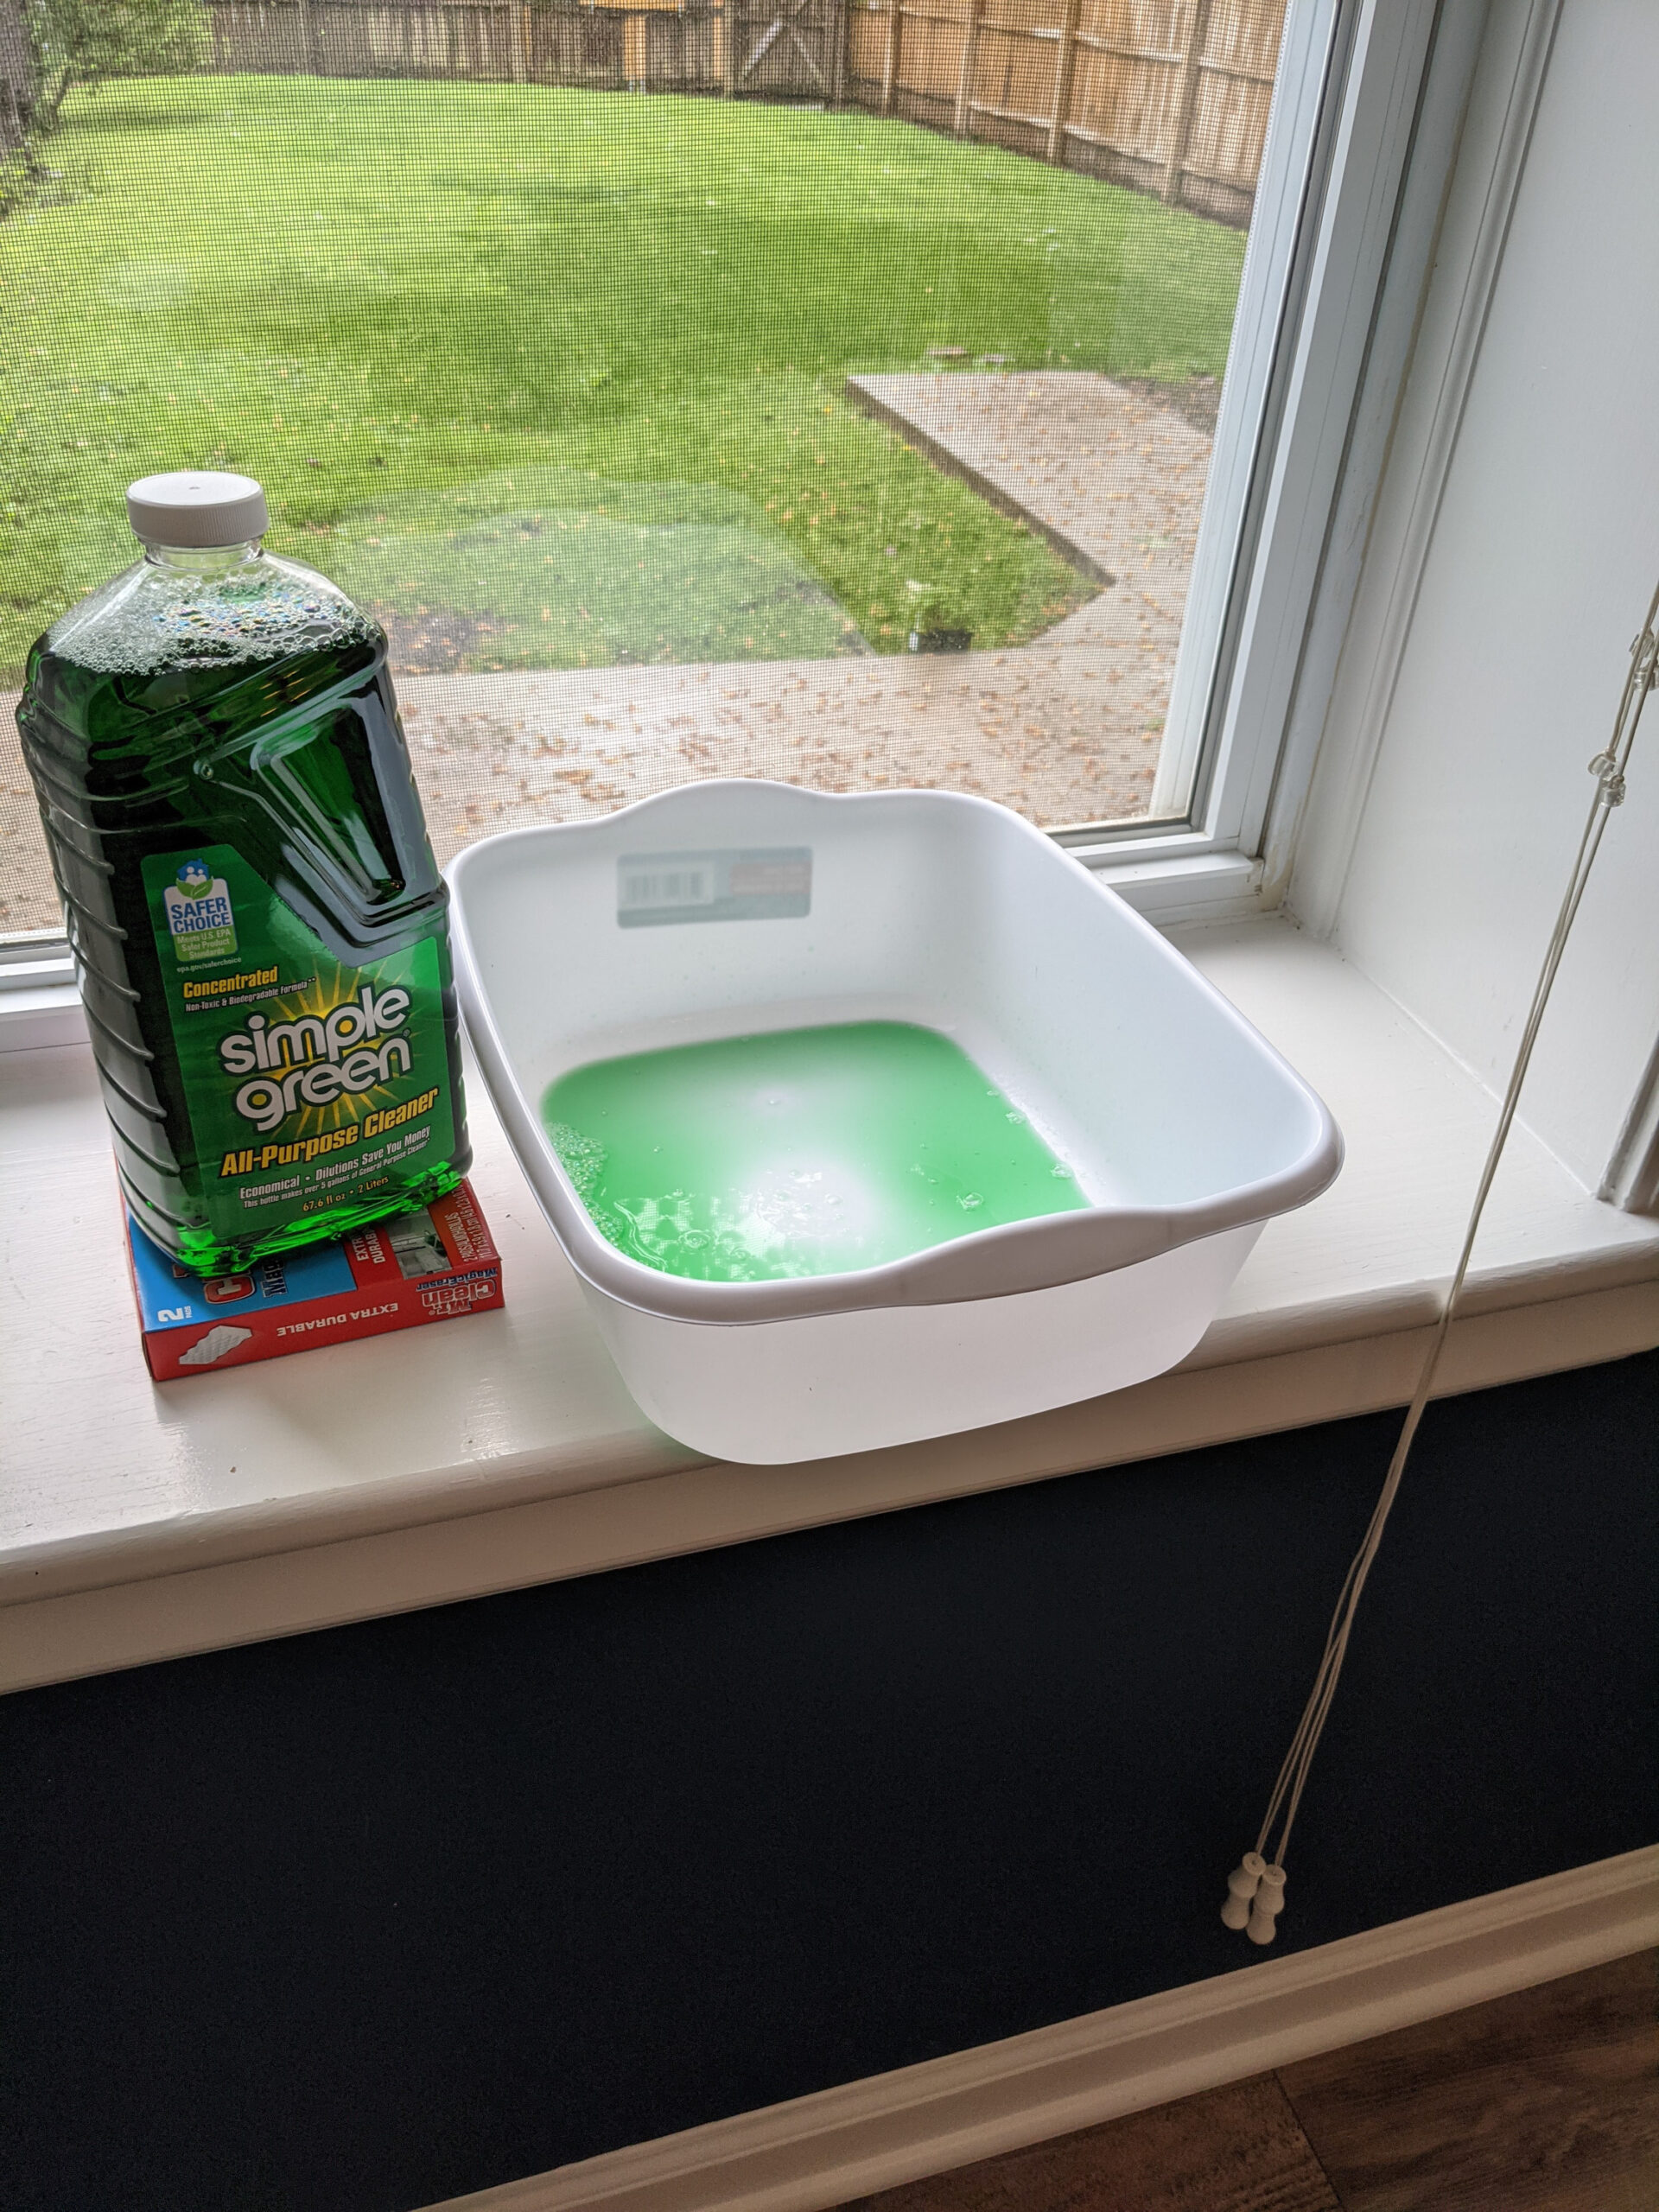 Green cleaning solution in a dishpan.